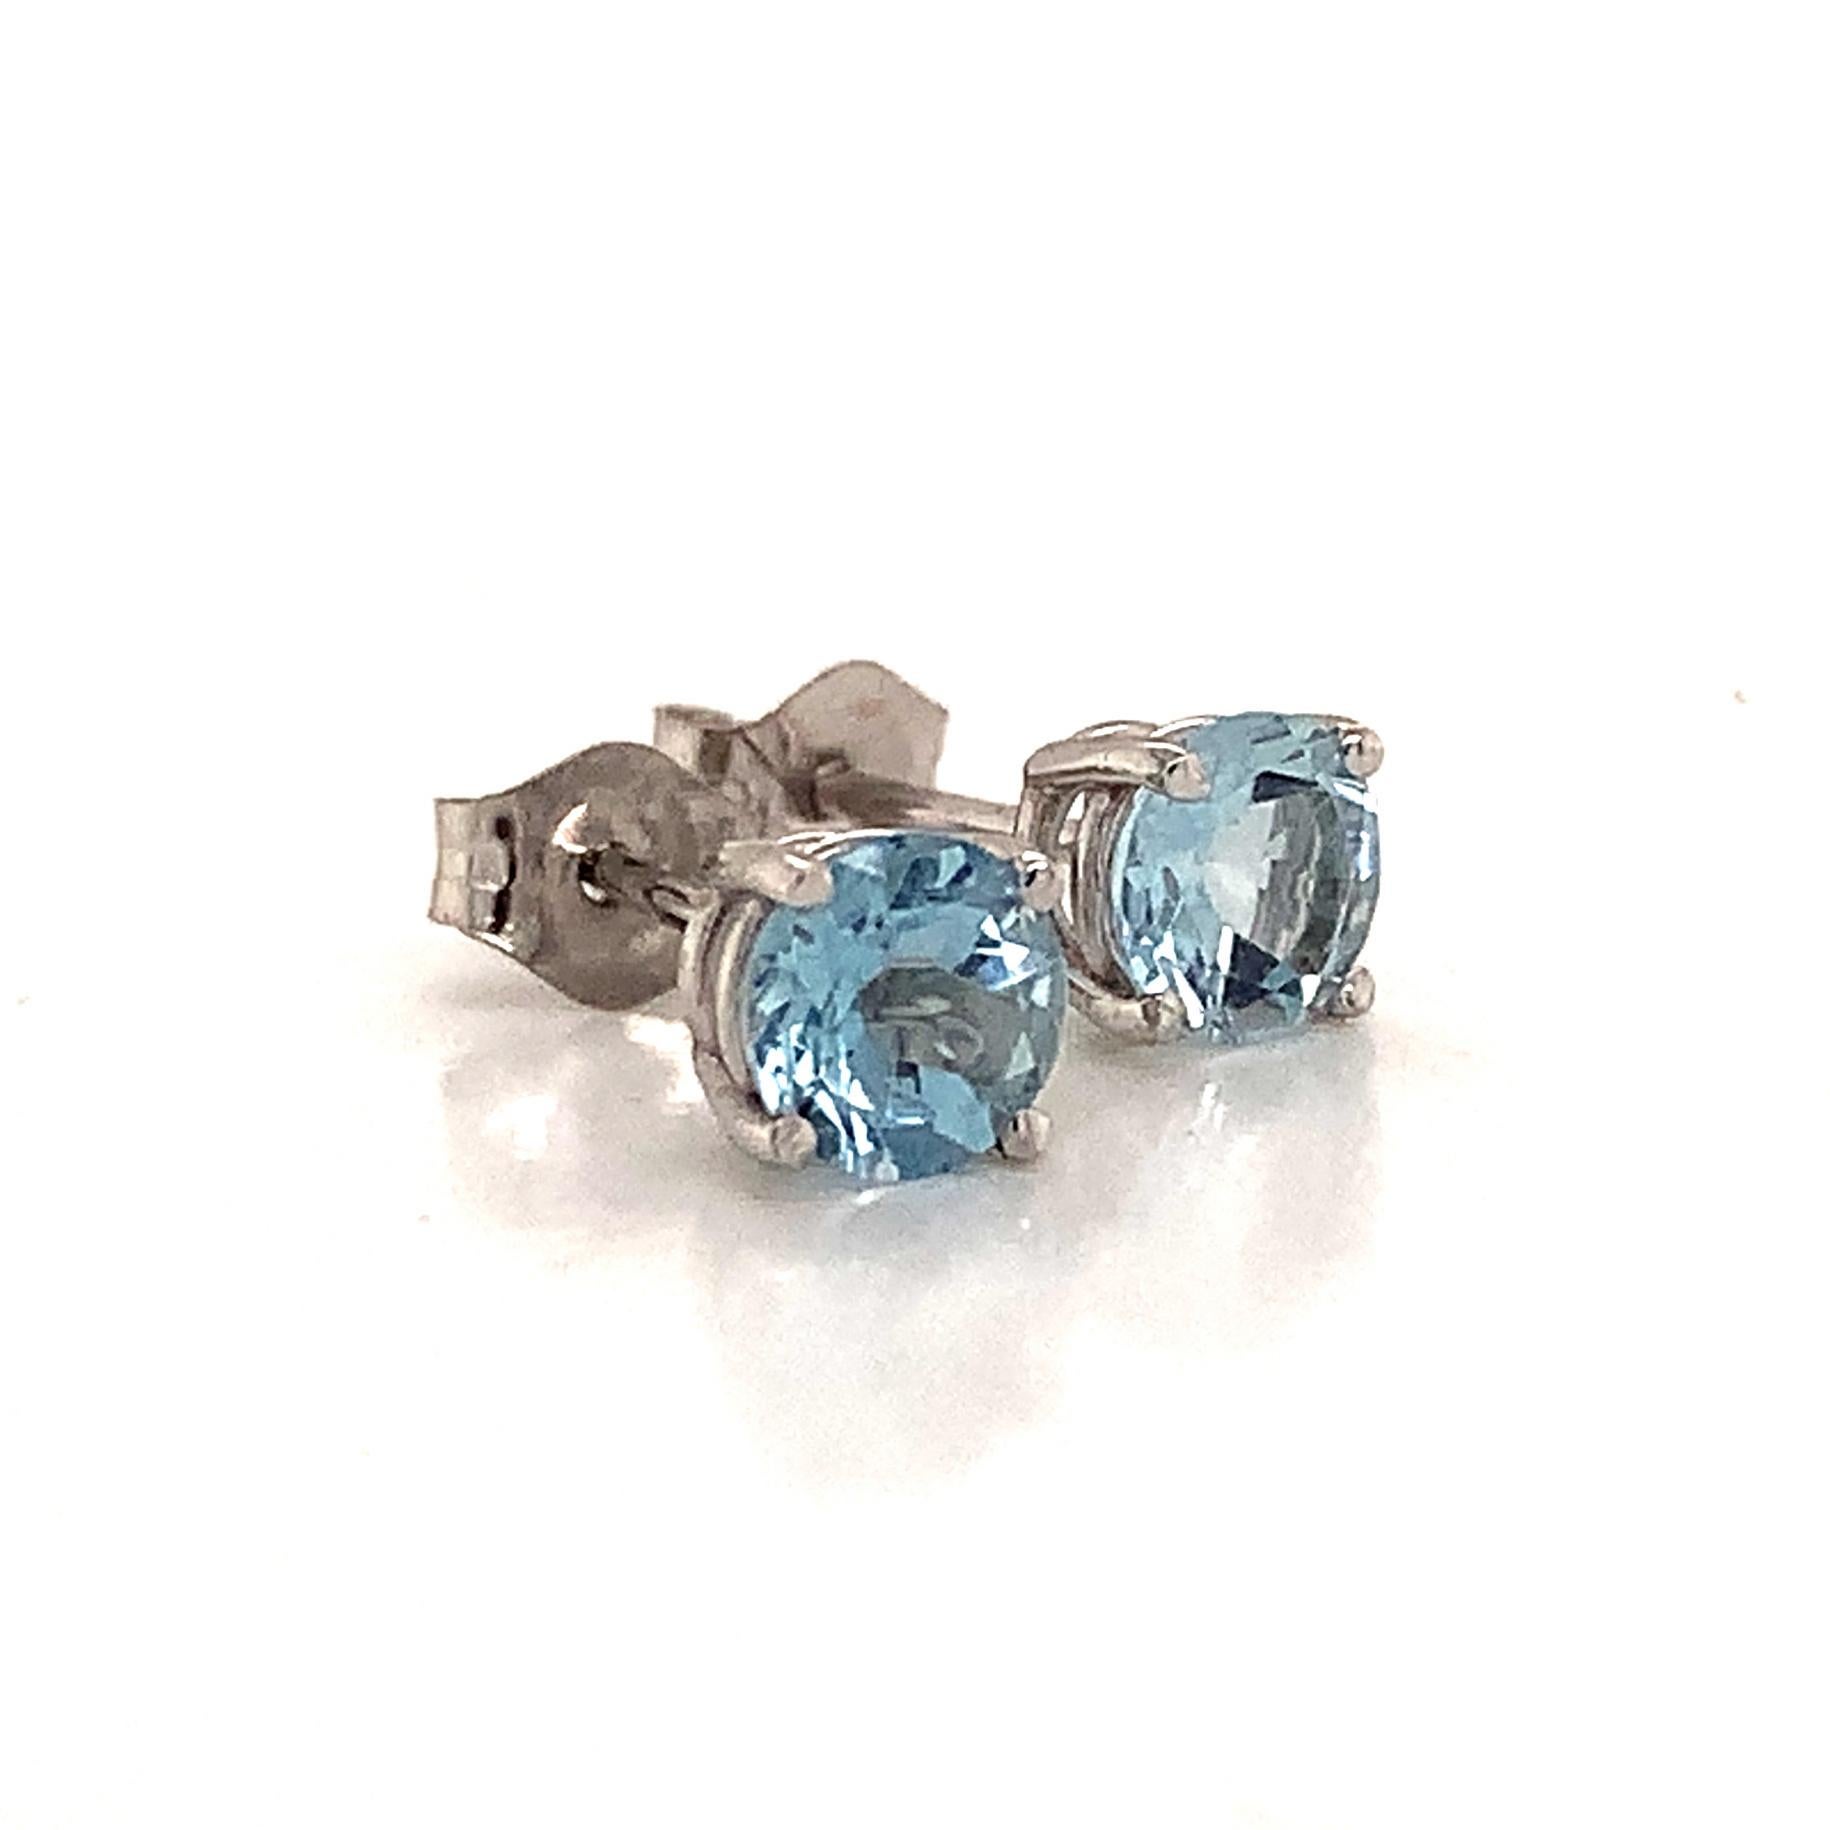 Natural Aquamarine Stud Earrings 14Karat White Gold 1.0 TCW Certified In New Condition For Sale In Brooklyn, NY